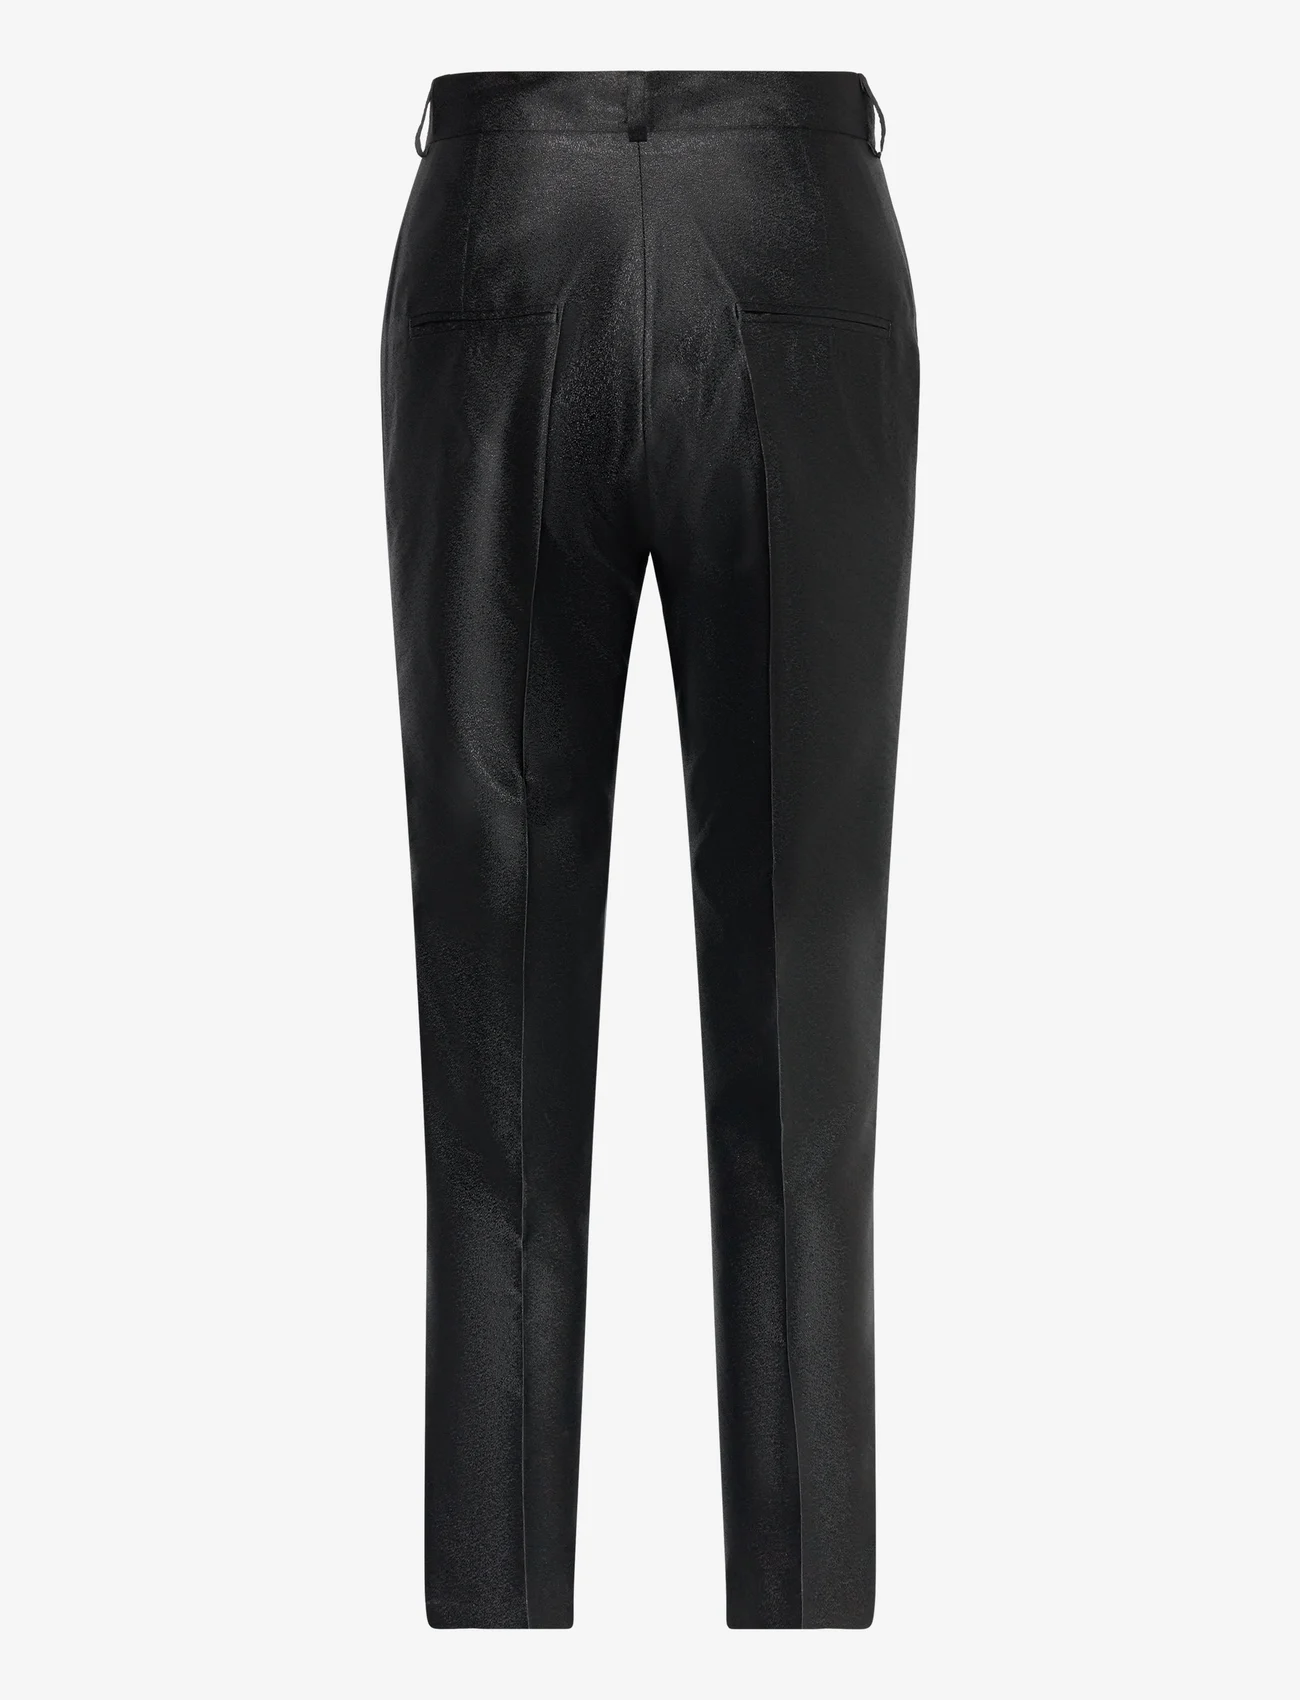 hálo - KAAMOS pants - tailored trousers - shimmering black - 1